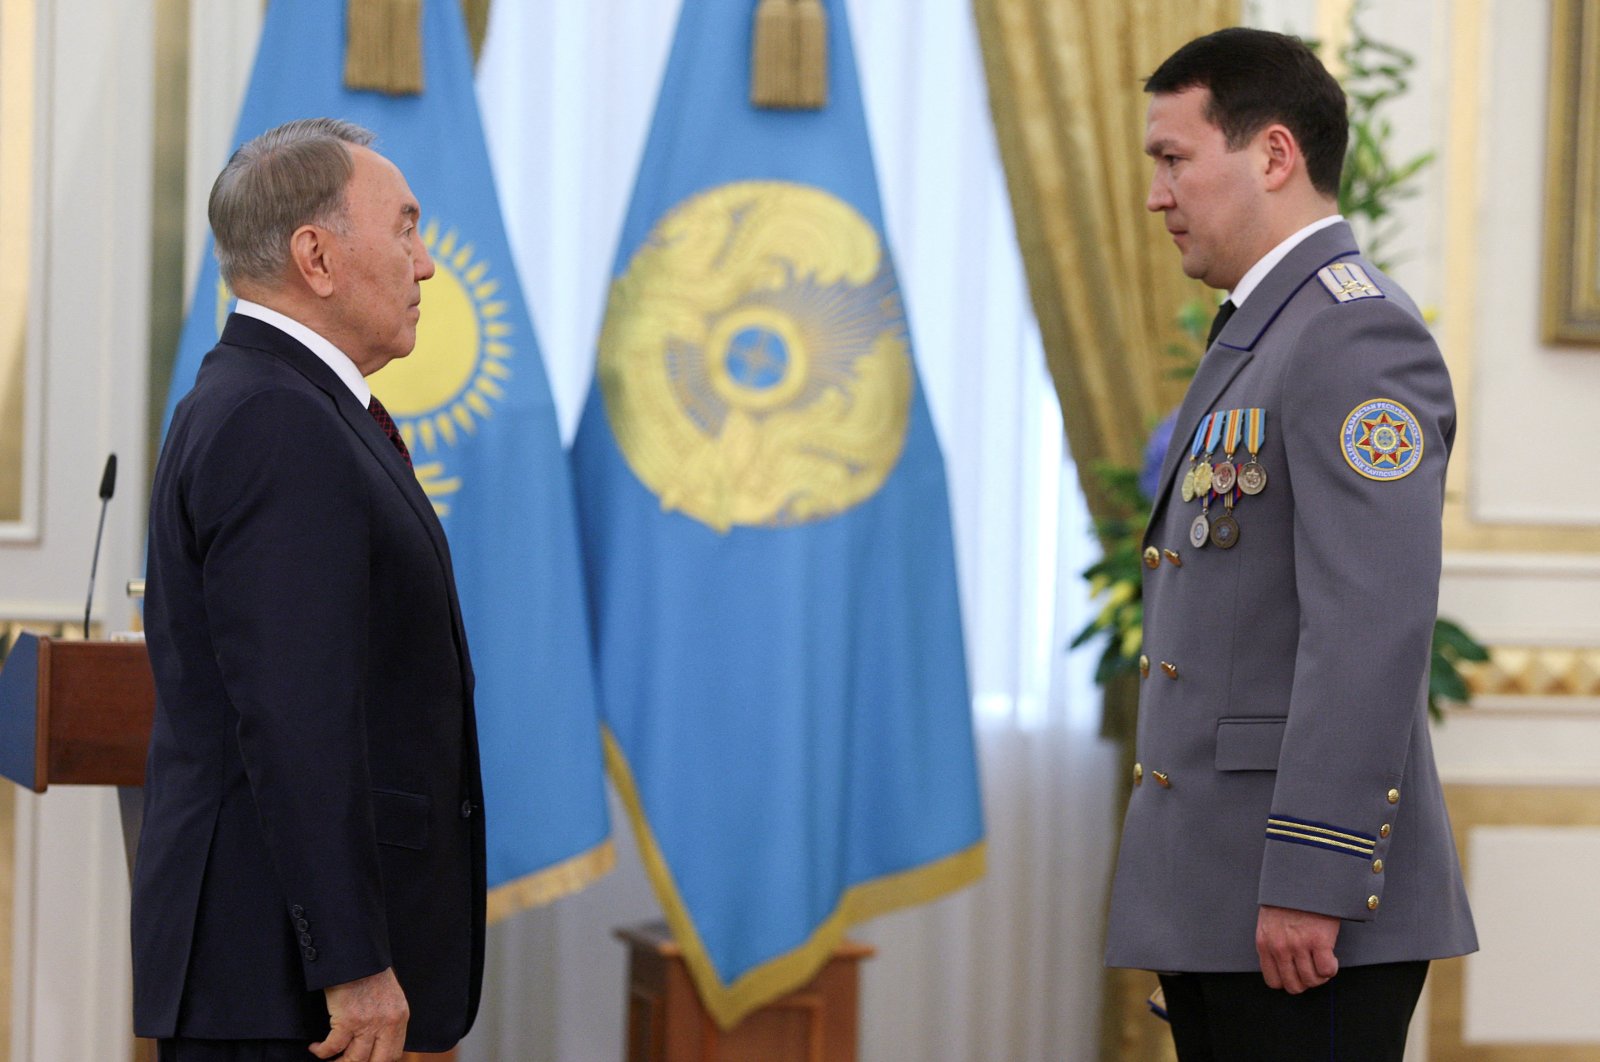 Former Kazakh President Nursultan Nazarbayev (L) and Deputy Chairperson of the National Security Committee Samat Abish attend an awarding ceremony in Astana, Kazakhstan, May 6, 2014. (Reuters Photo)